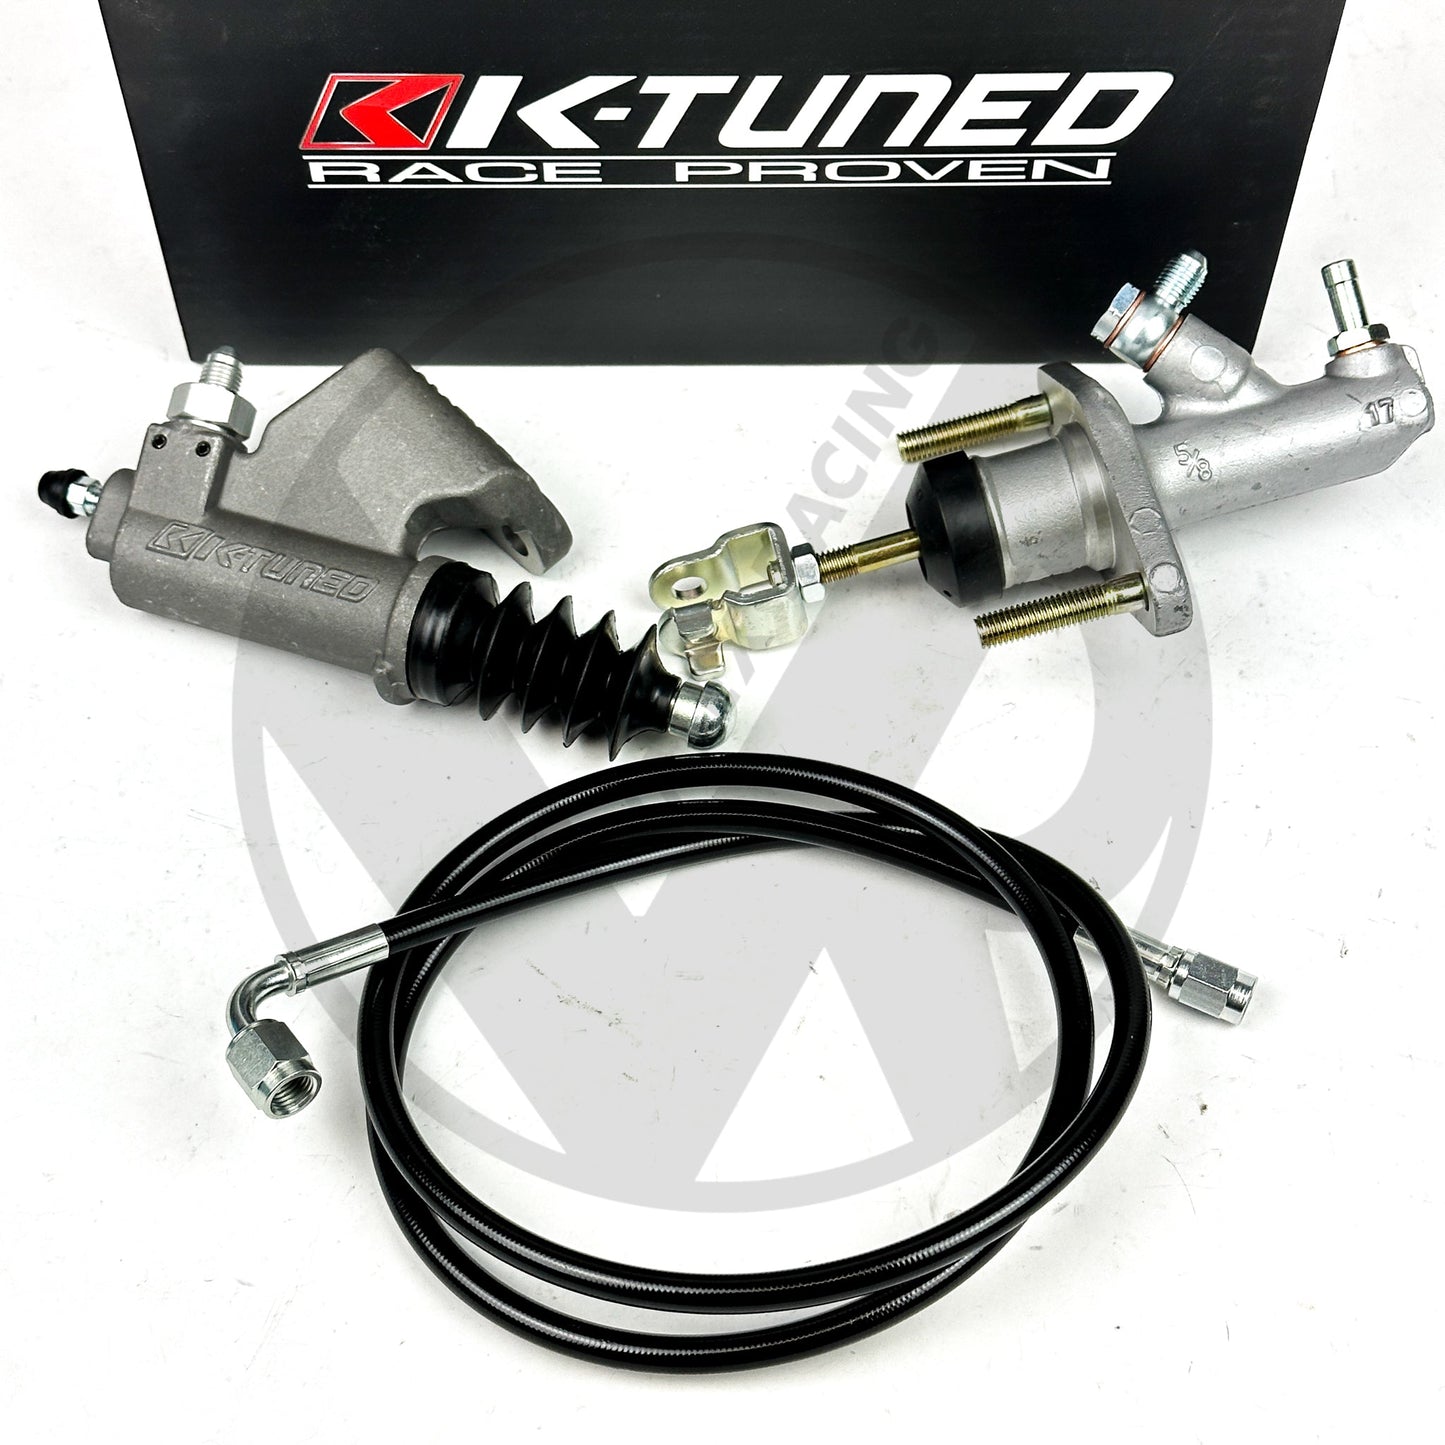 Bolt In EM1 CMC & K-Tuned Slave Kit for 04-08 Acura TSX Silver Clutch line